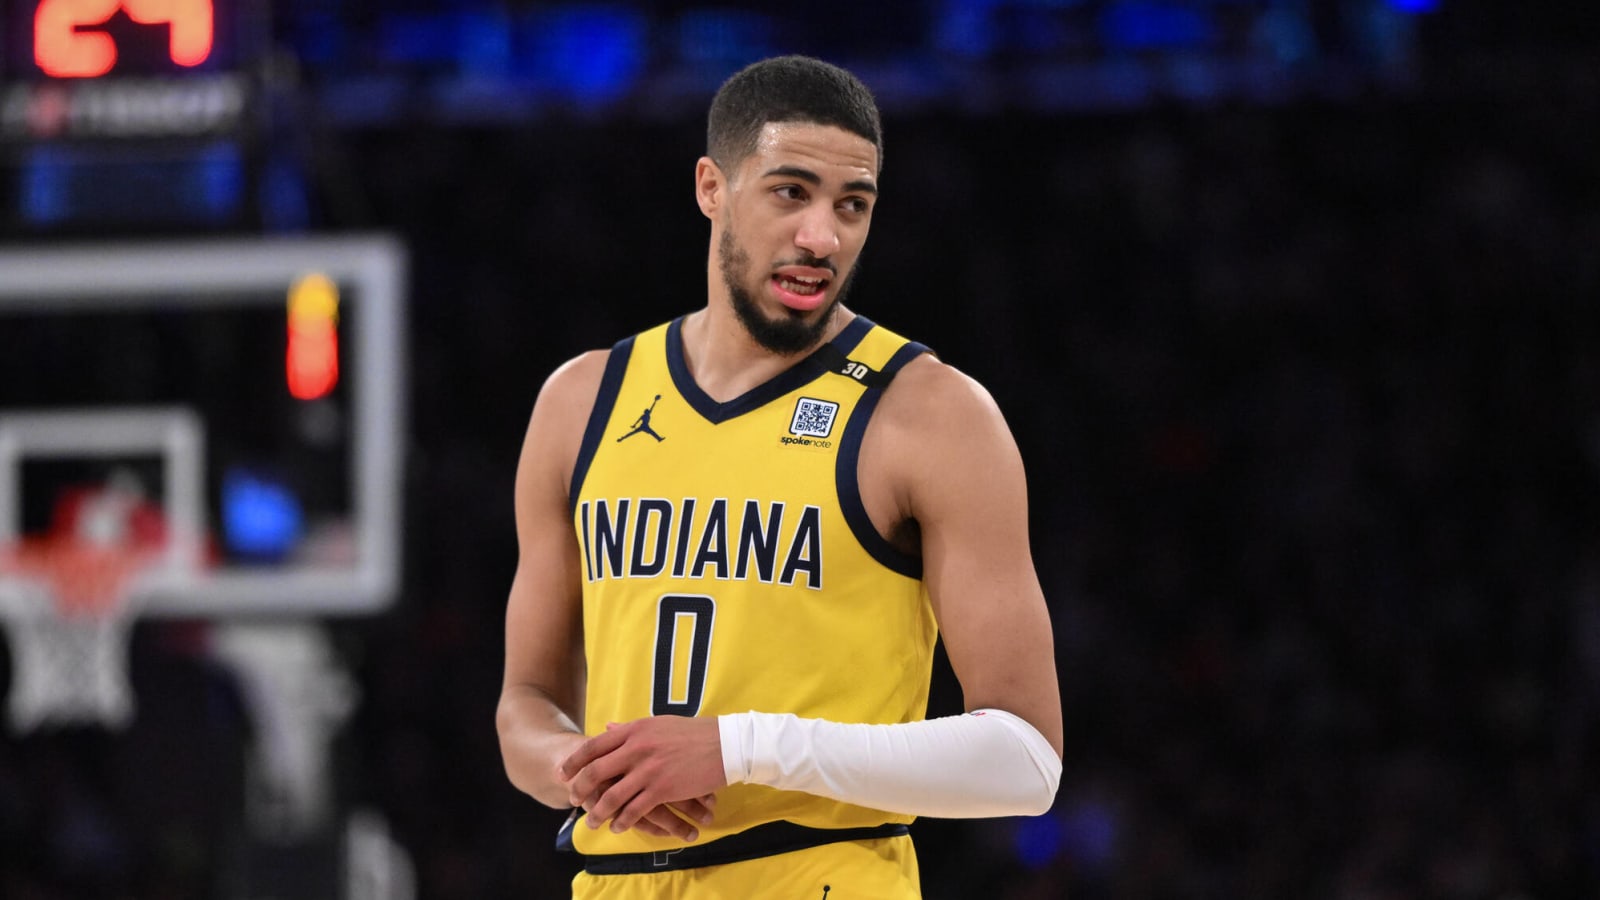 Indiana Pacers vs Charlotte Hornets: Tyrese Haliburton is available, Jalen Smith is out, final injury report, official starting lineups for February 12